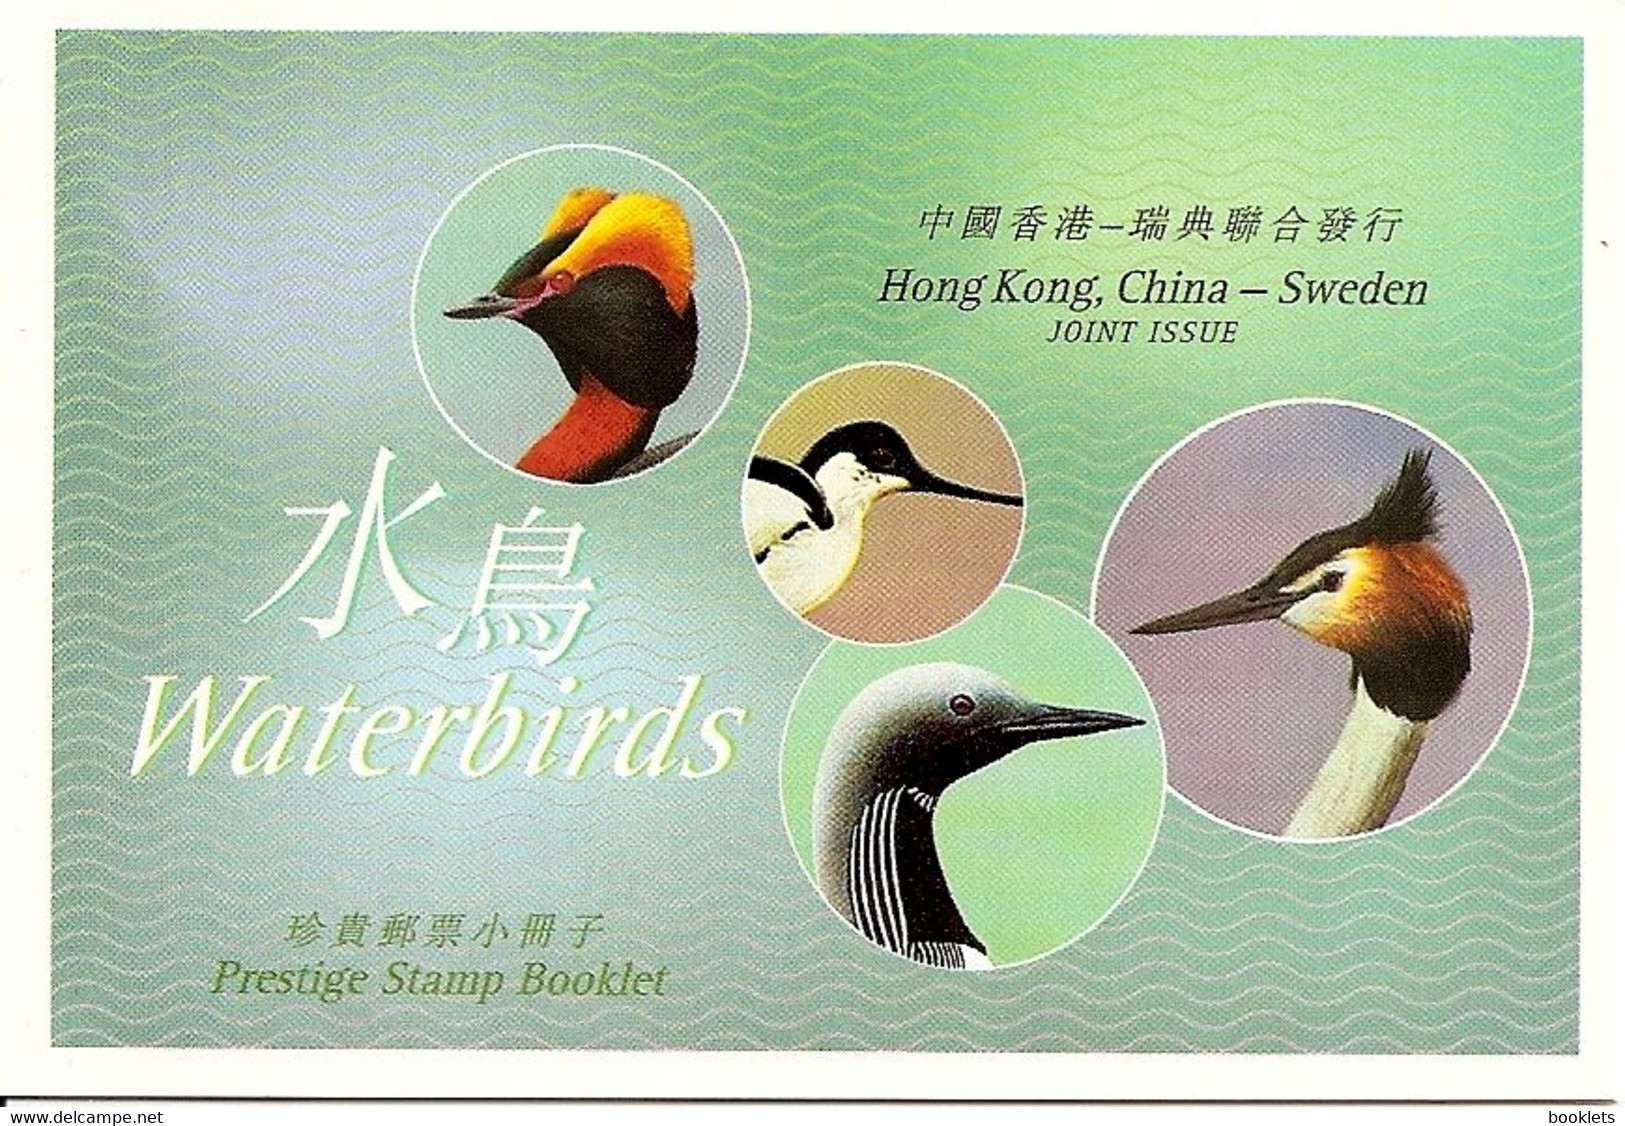 HONGKONG, Booklet 67, 2003, Waterbirds, Joint Issue With Sweden - Booklets